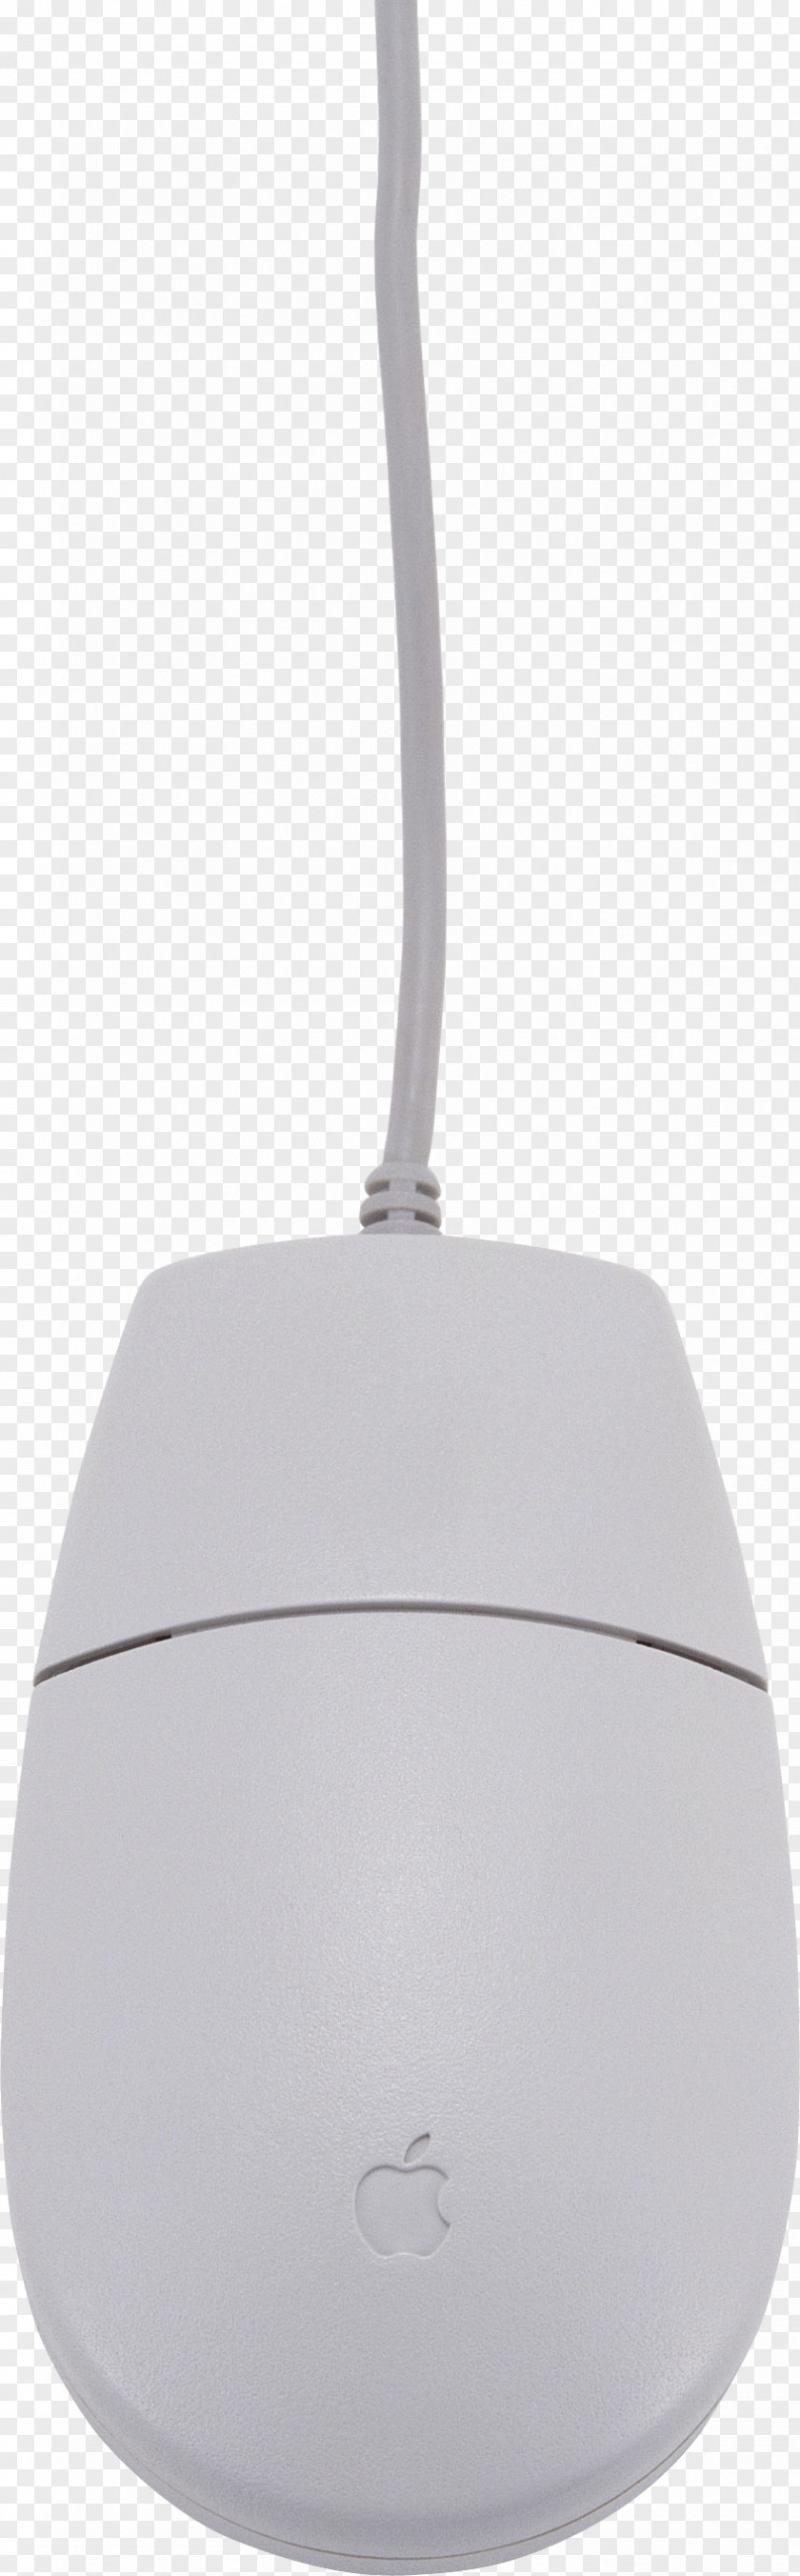 White Computer Mouse Image PNG